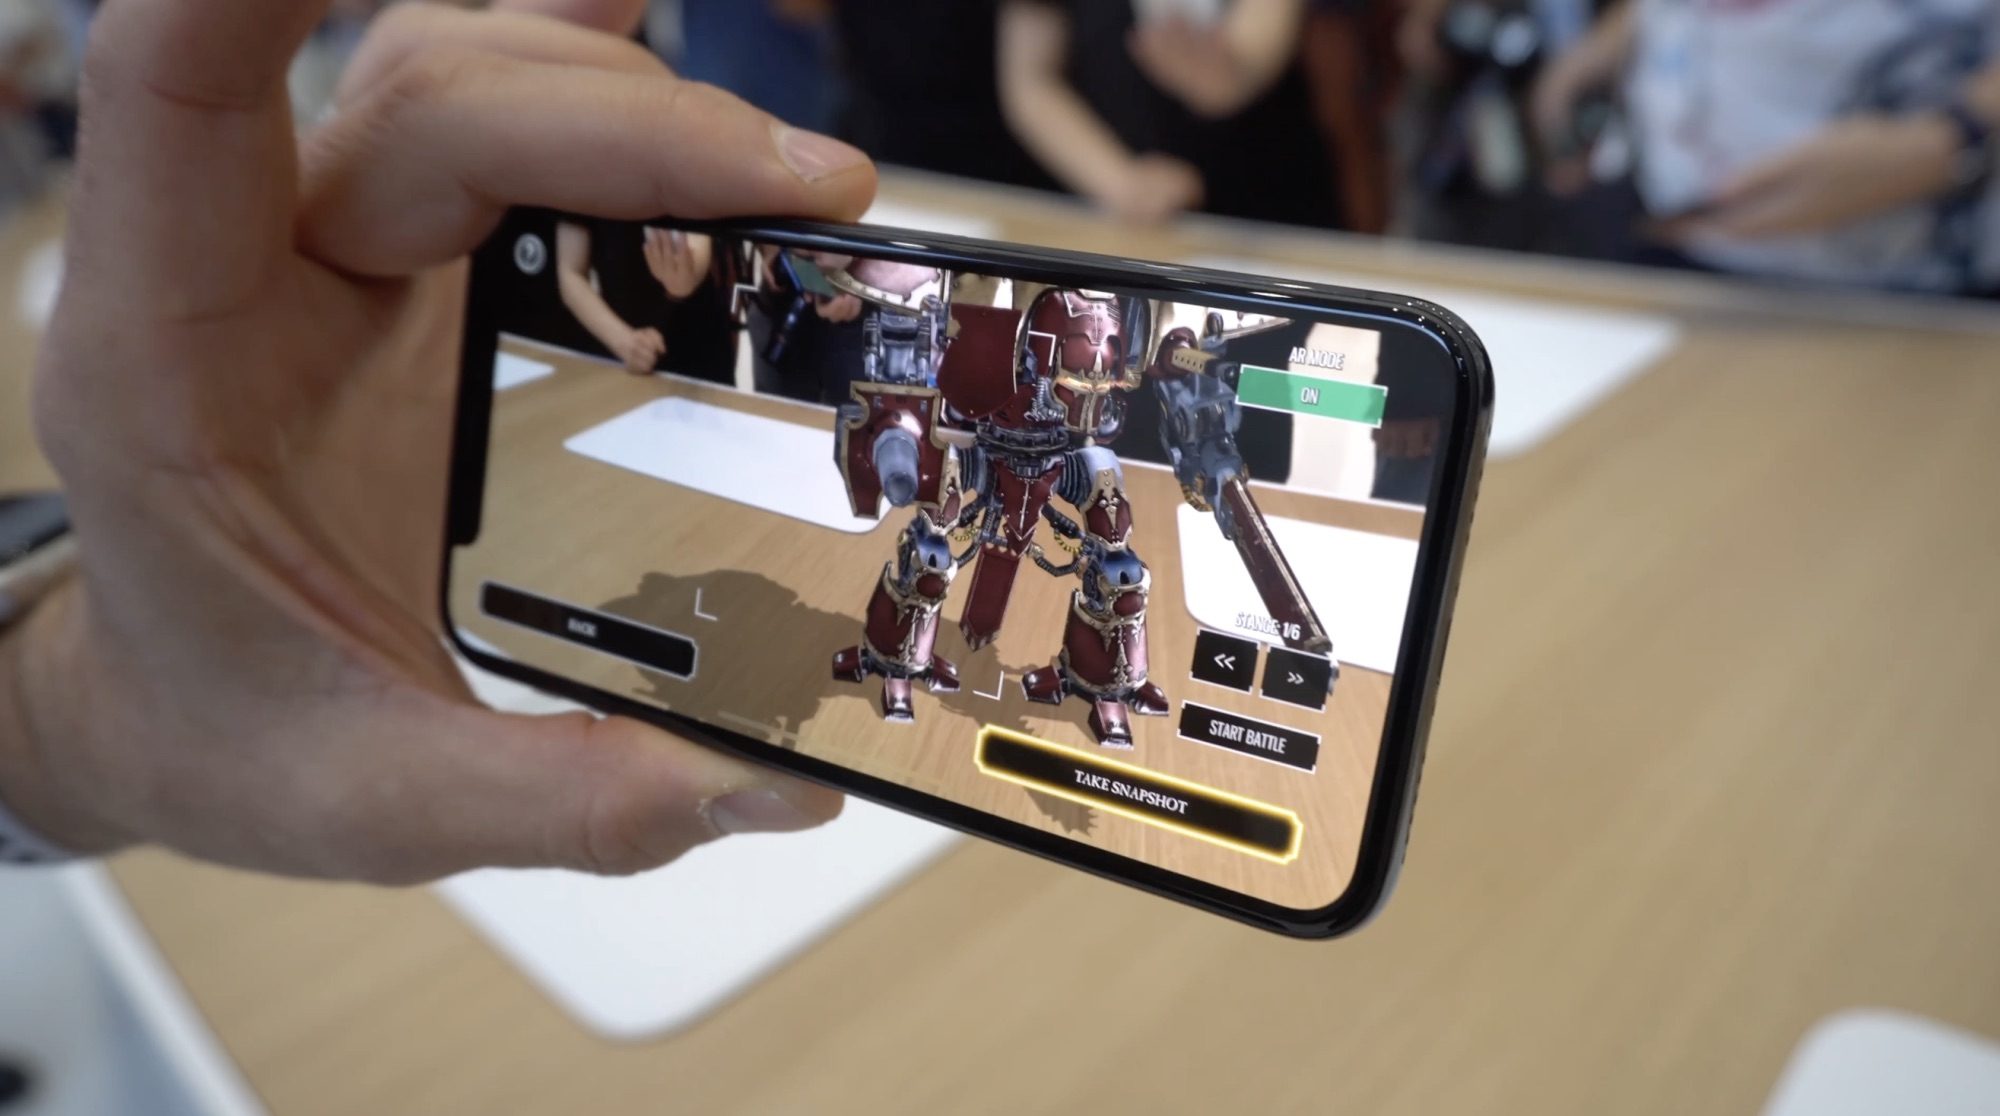 Apple Could Grow Revenue by as Much as $11 Billion with AR, Analysts Say